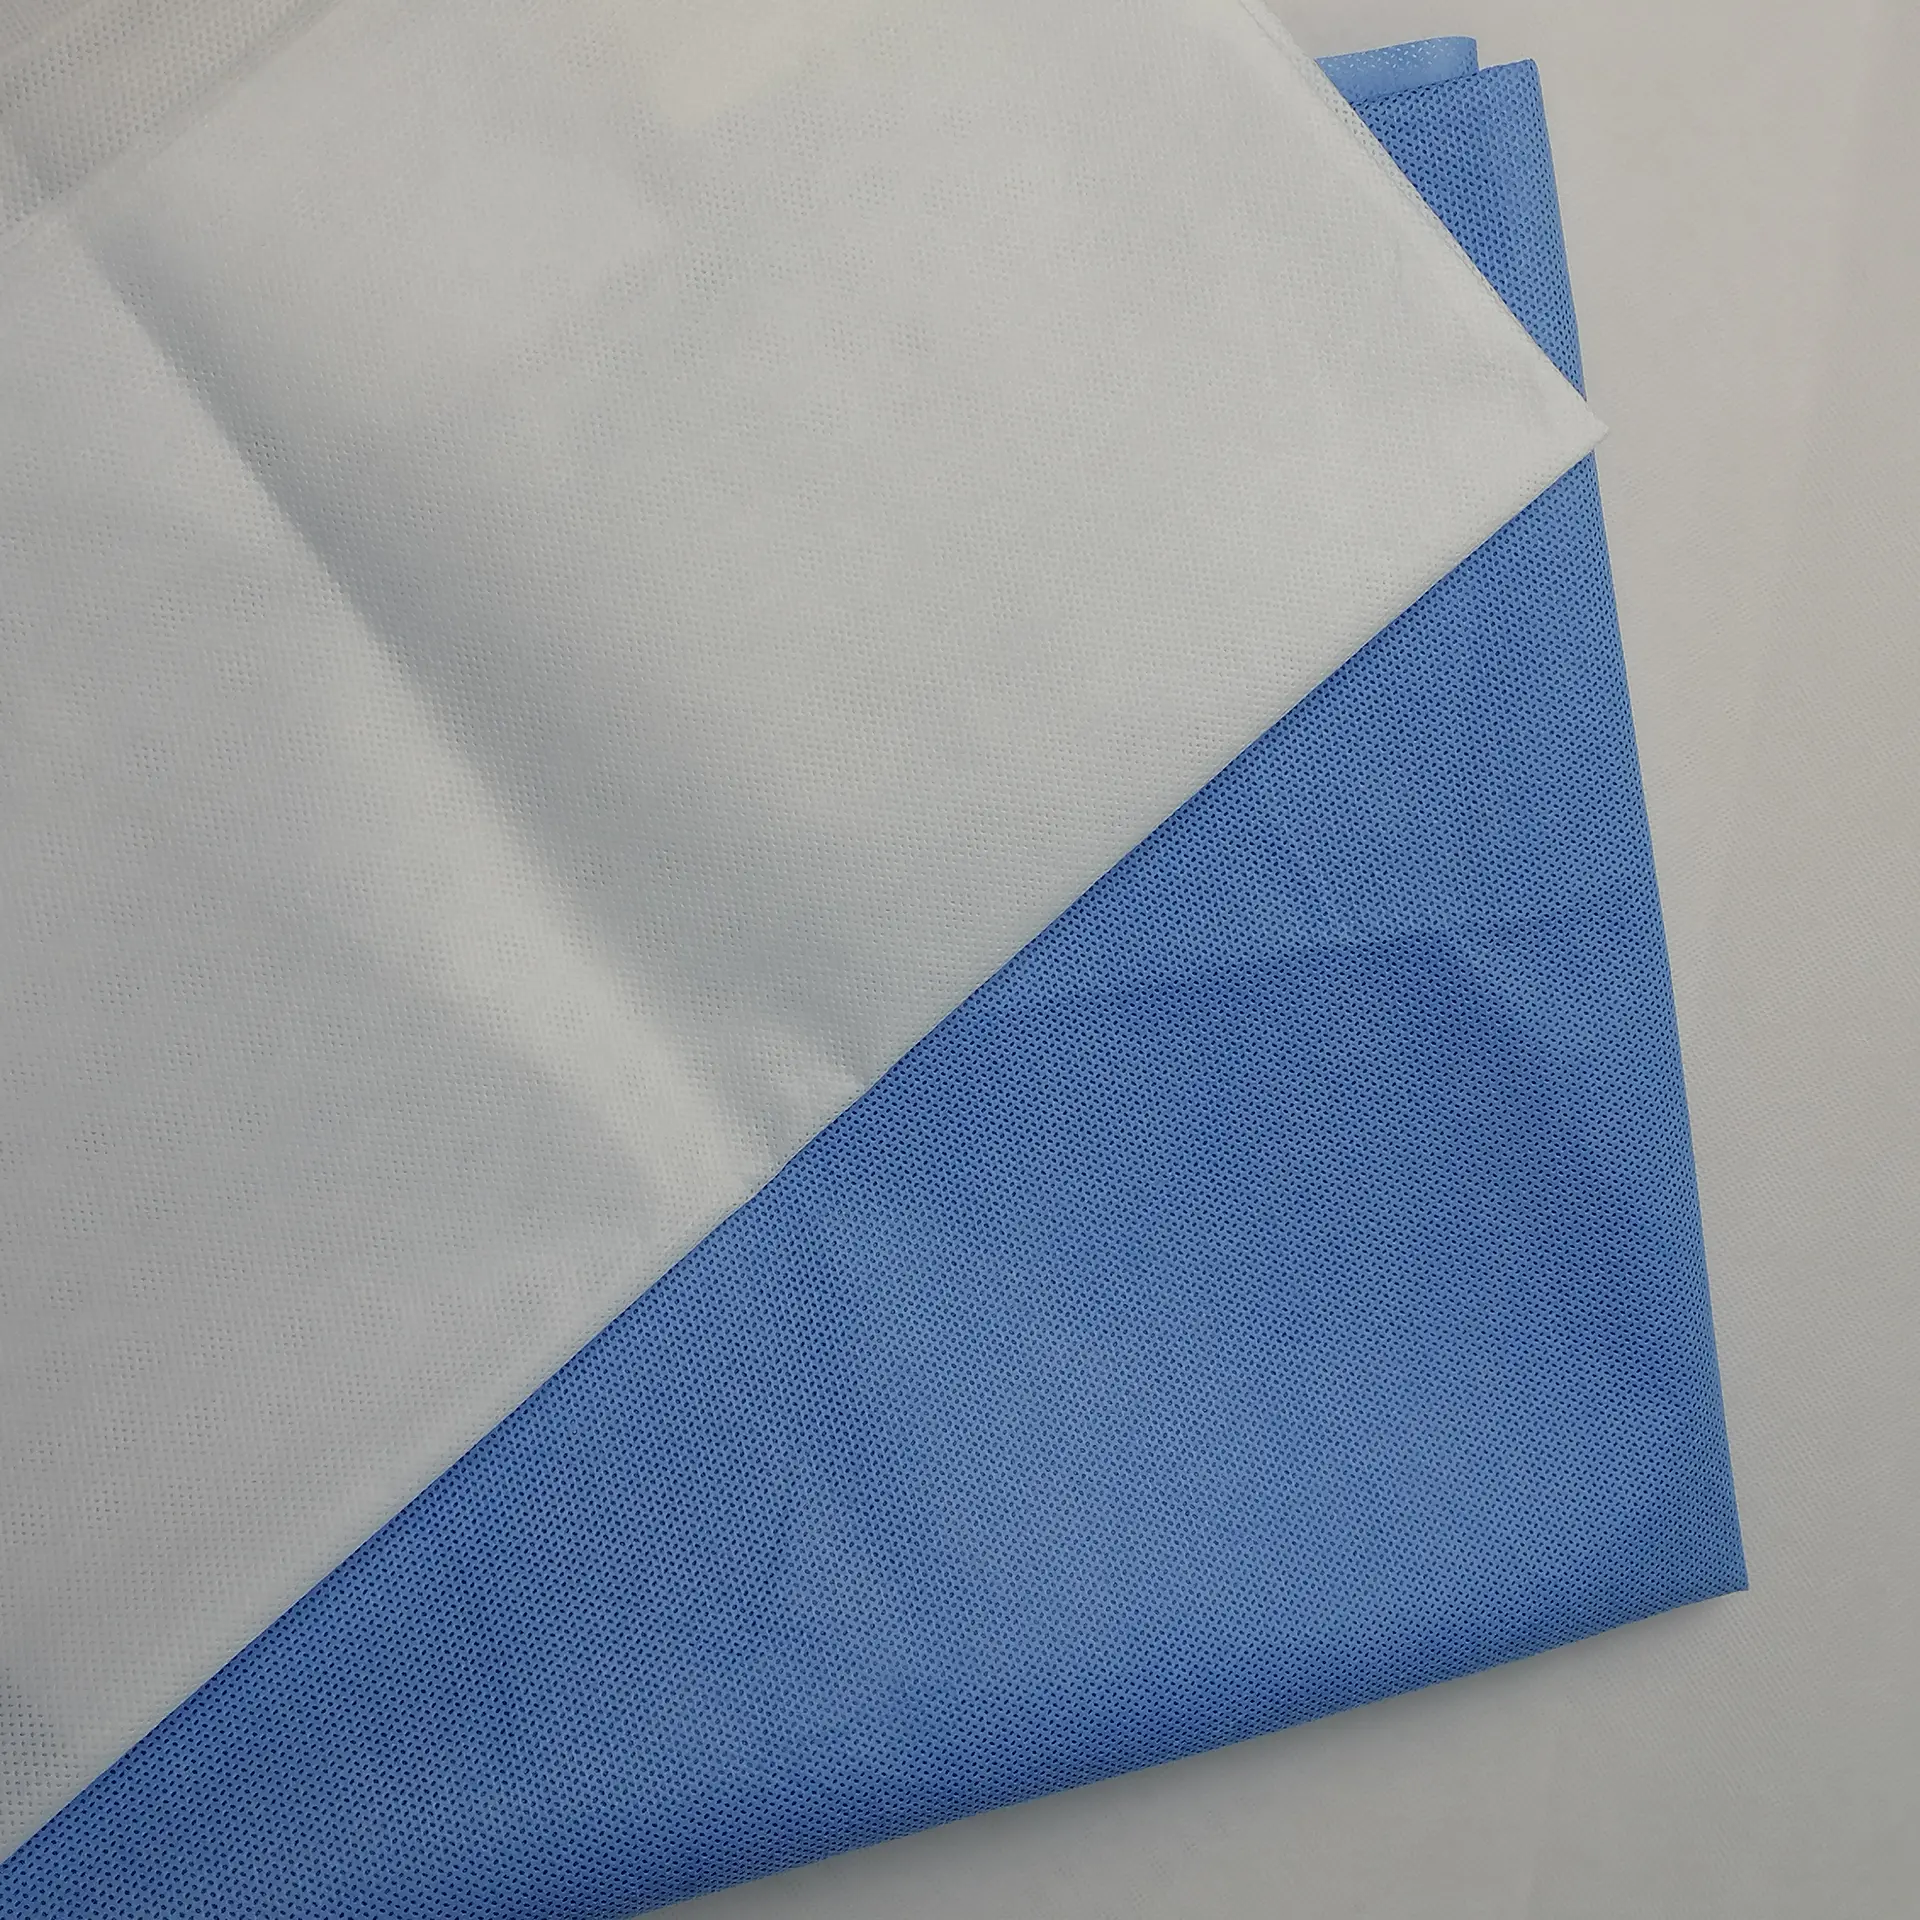 High quality professional medical sms spunbond pp non-woven fabric